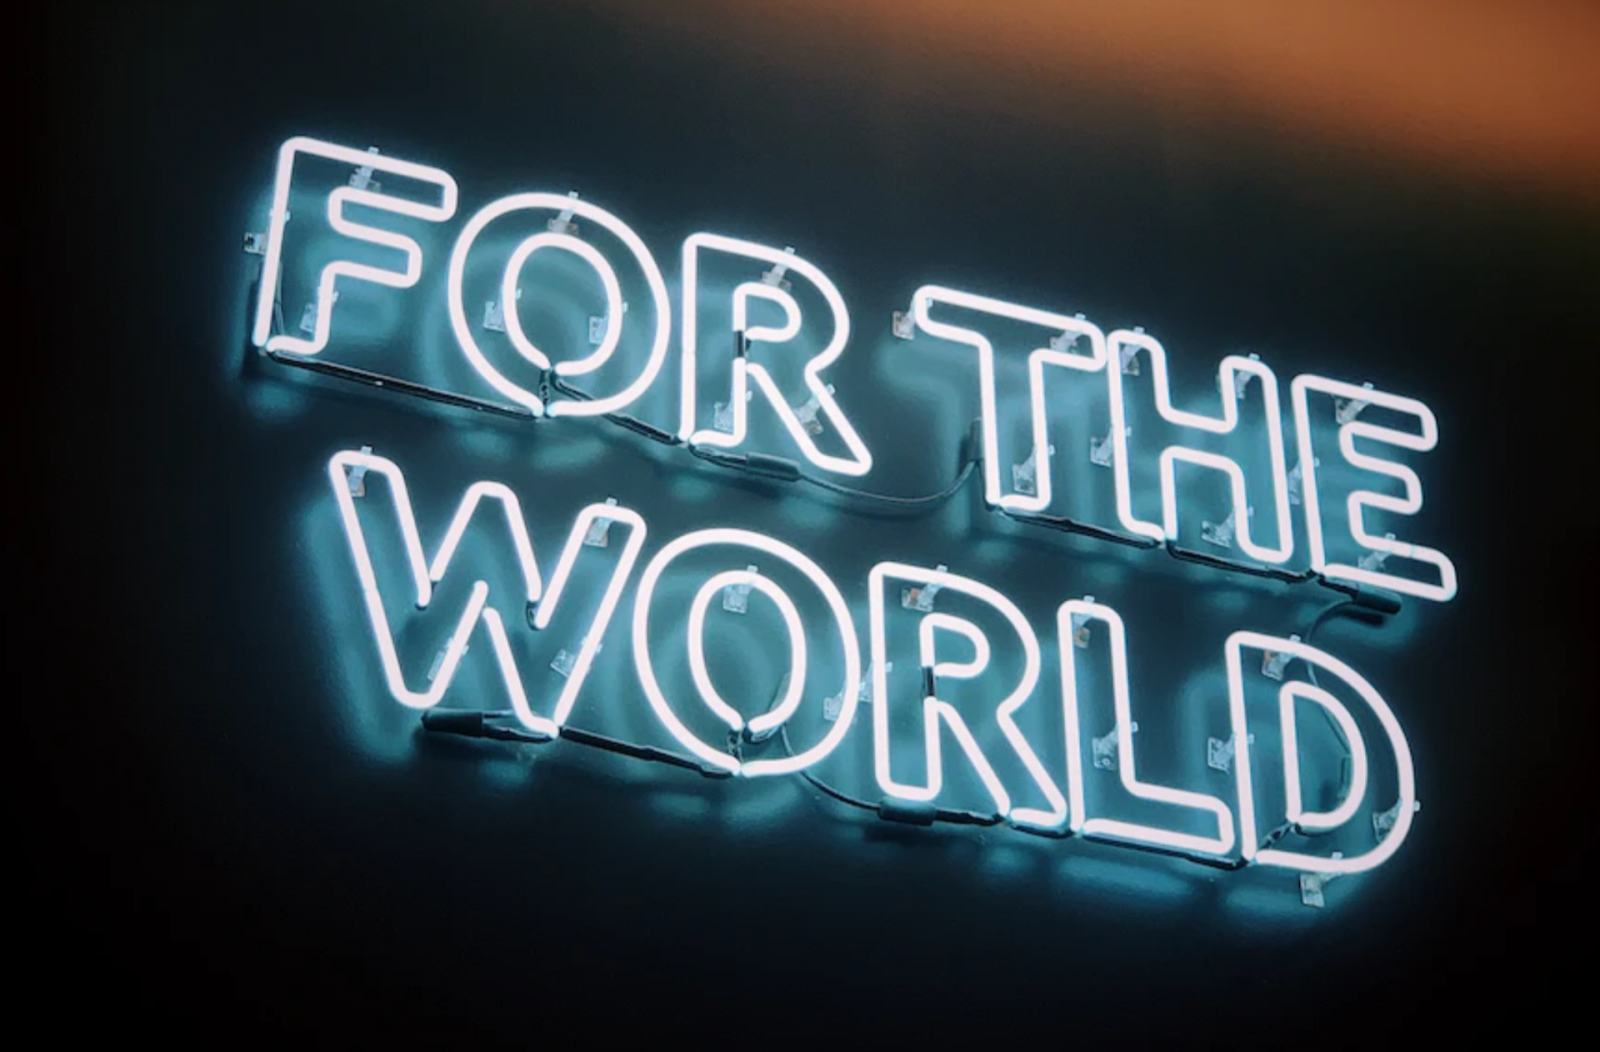 A neon sign that says "For the World"